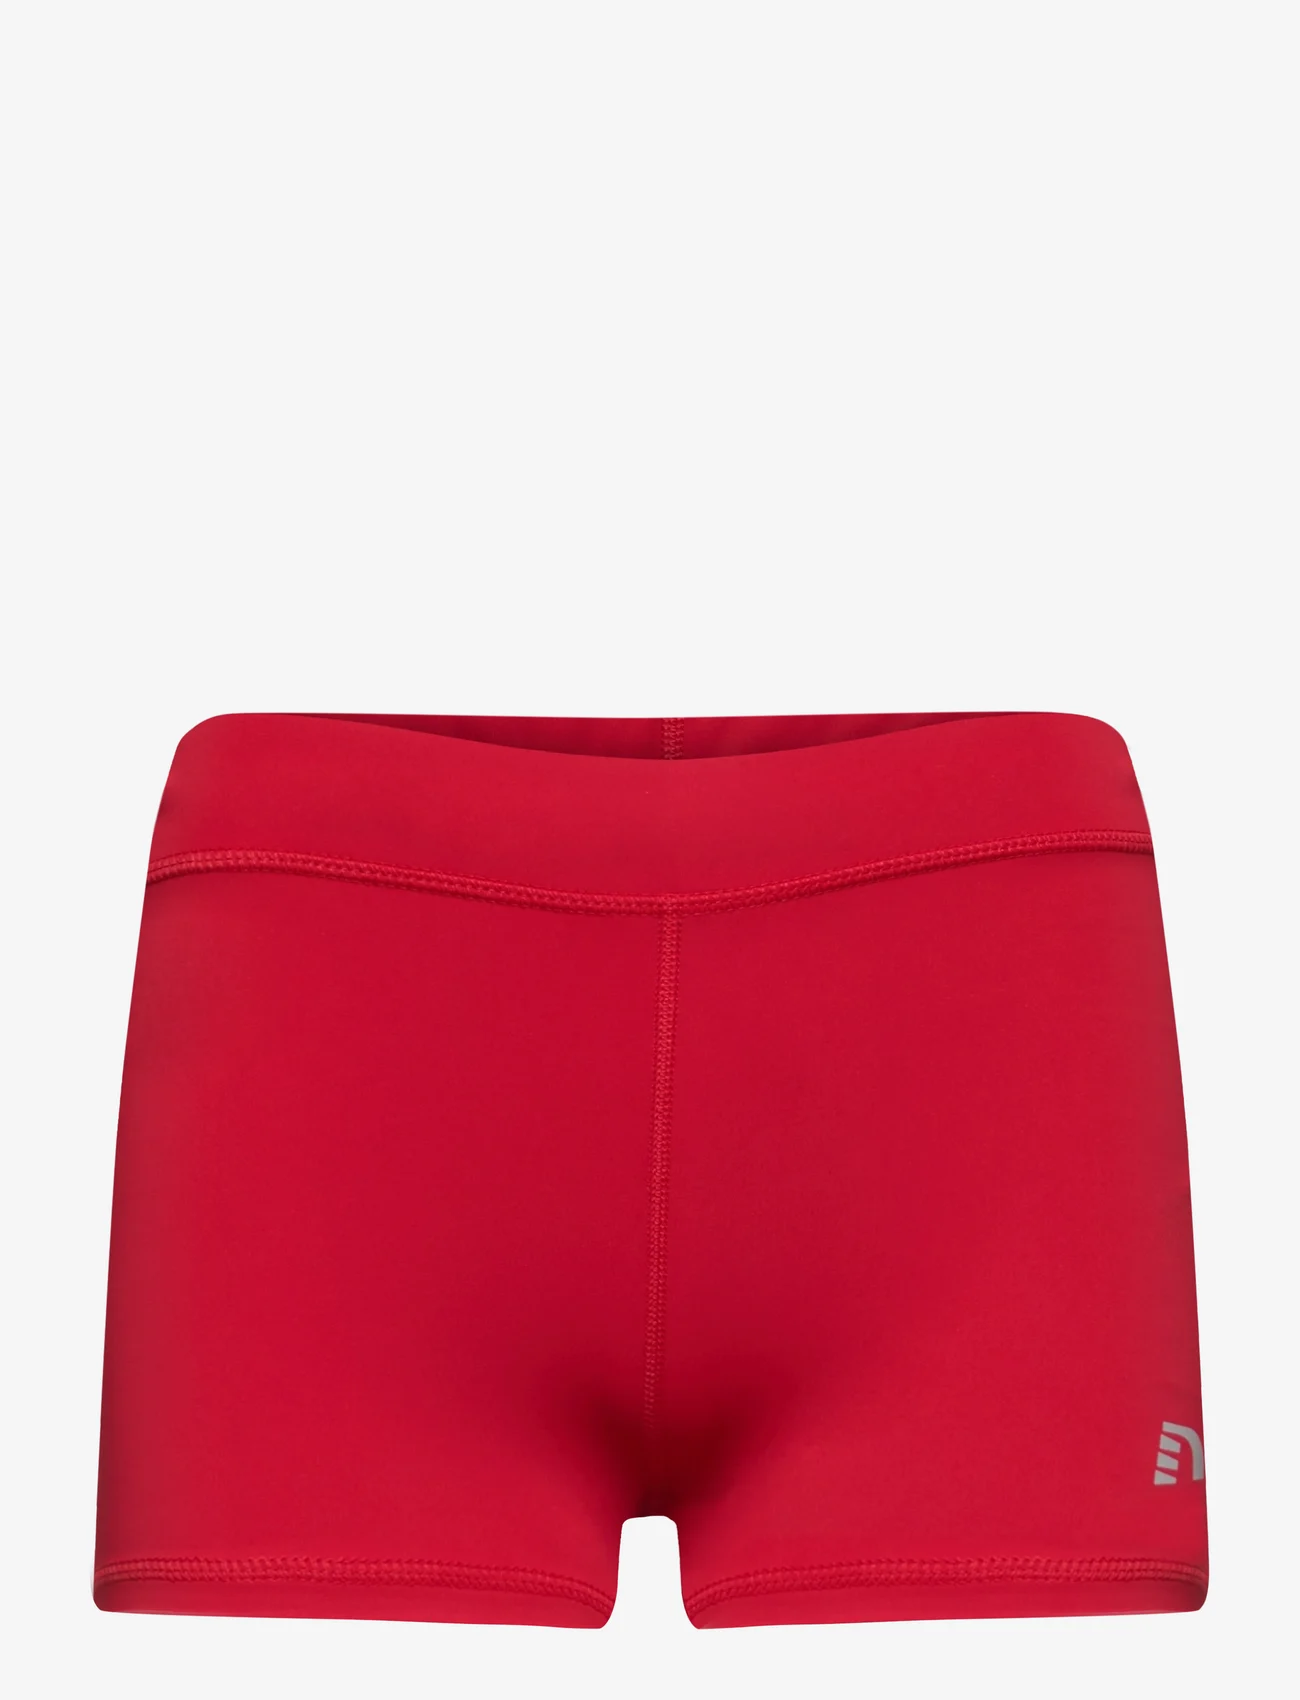 Newline - WOMEN CORE ATHLETIC HOTPANTS - lowest prices - tango red - 0